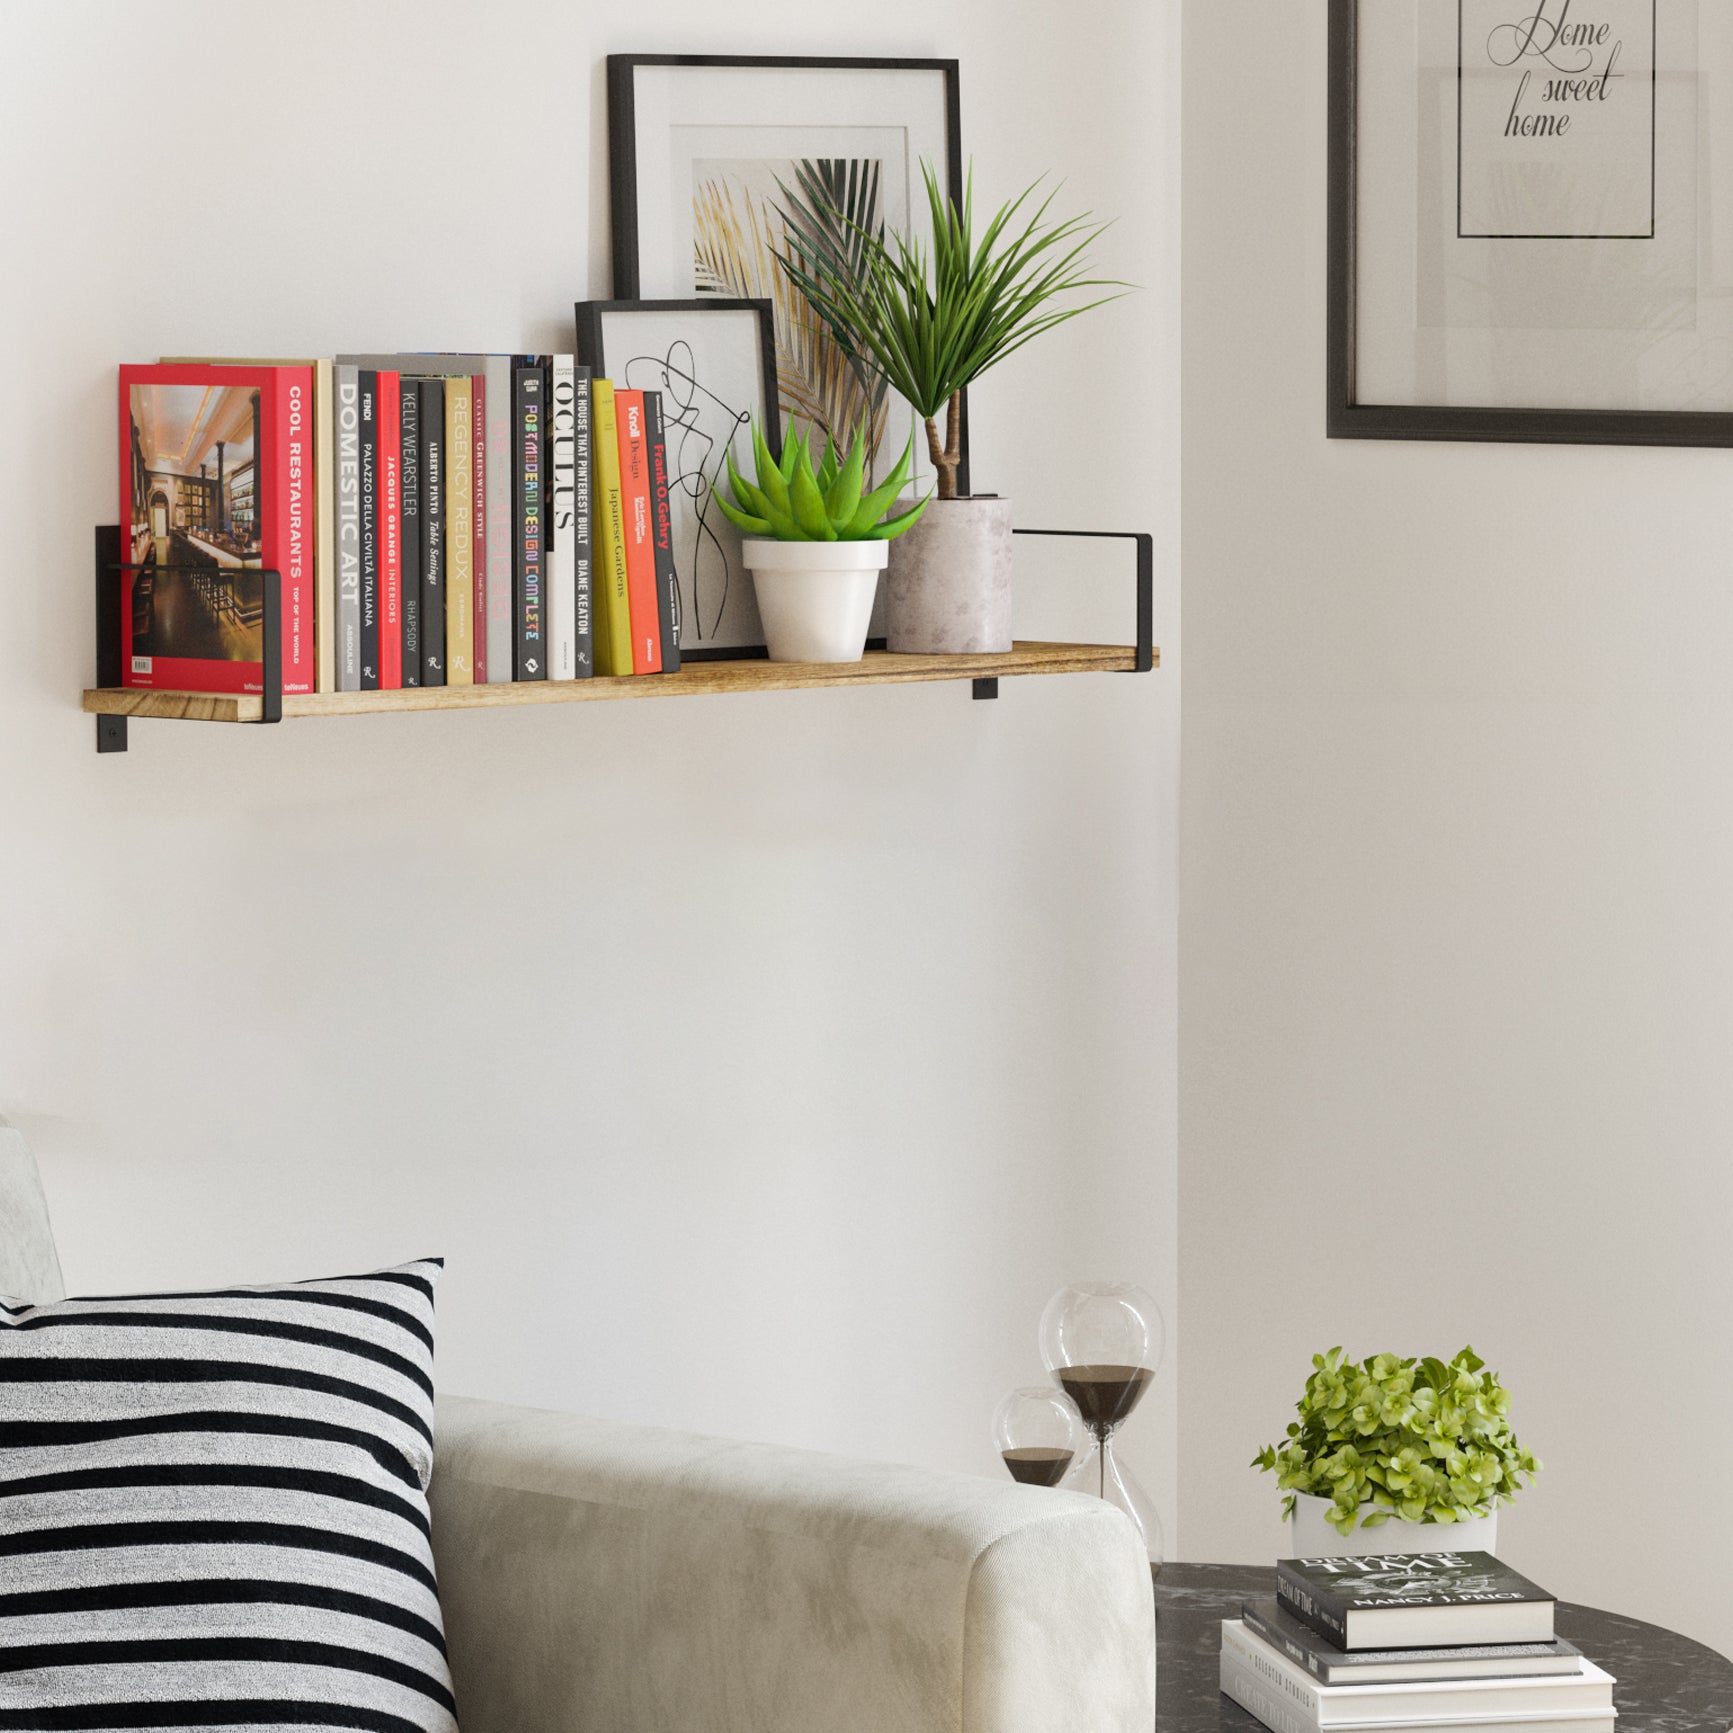 Living room decor scene with a wood shelf holding books, plants, and framed art above a gray sofa, creating a cozy corner.